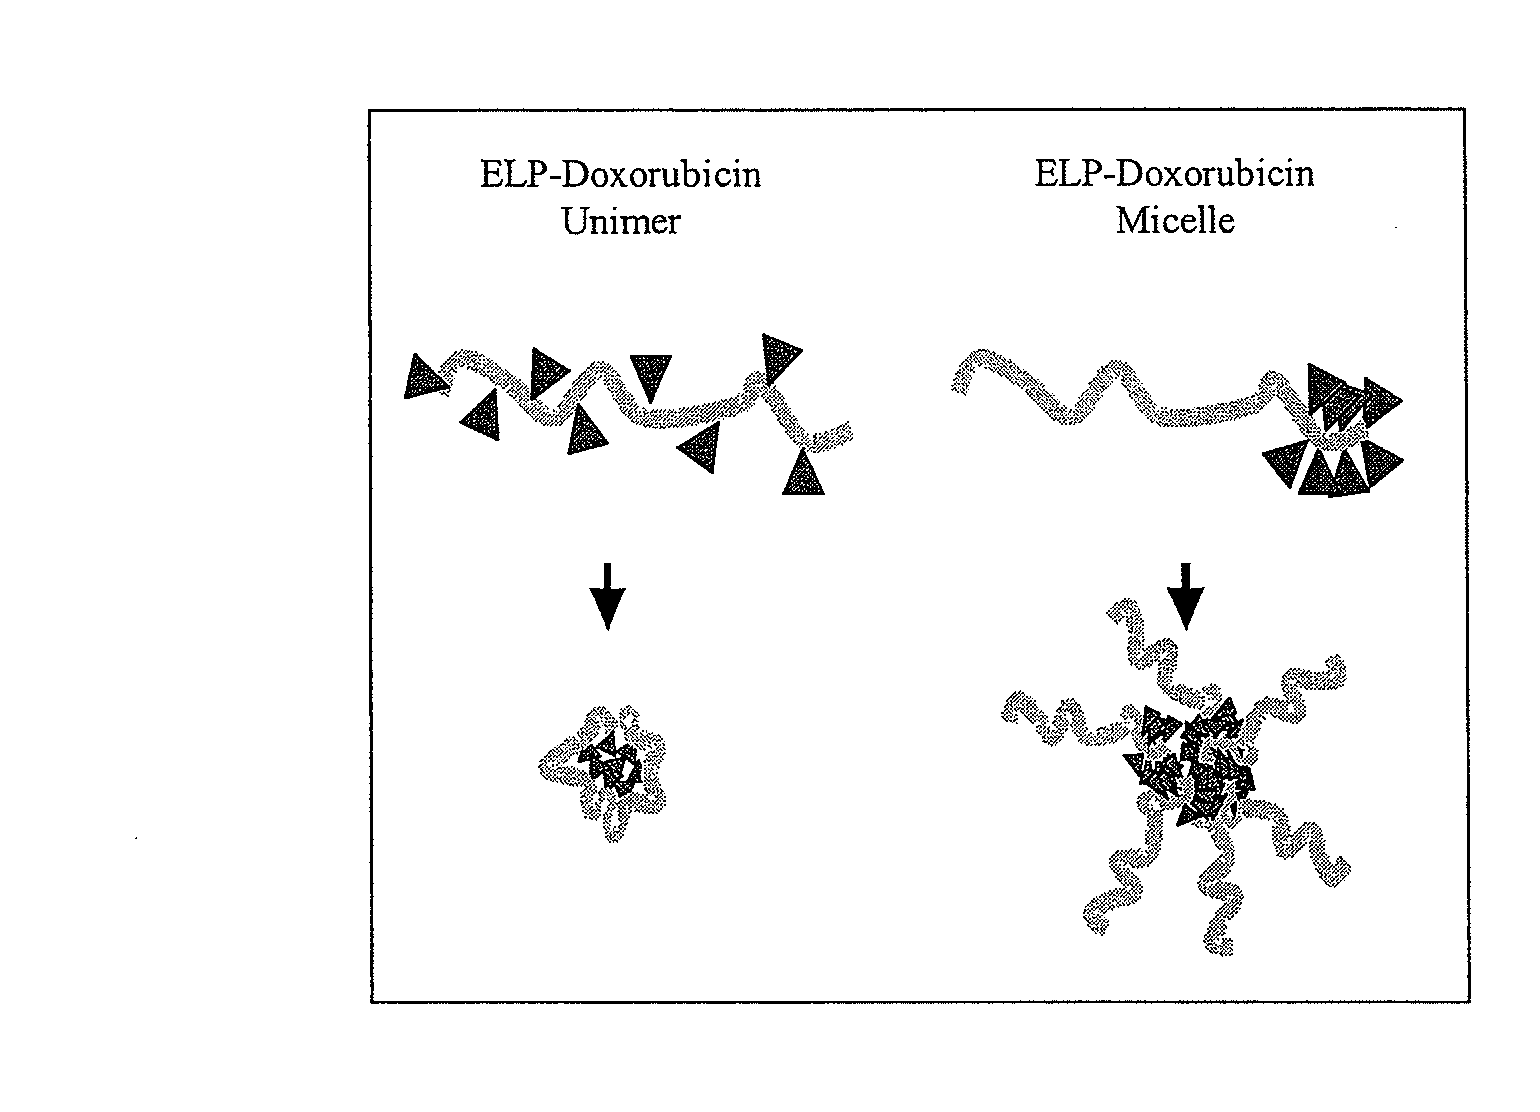 Methods and compositions for modulating drug-polymer architecture, pharmacokinetics and biodistribution